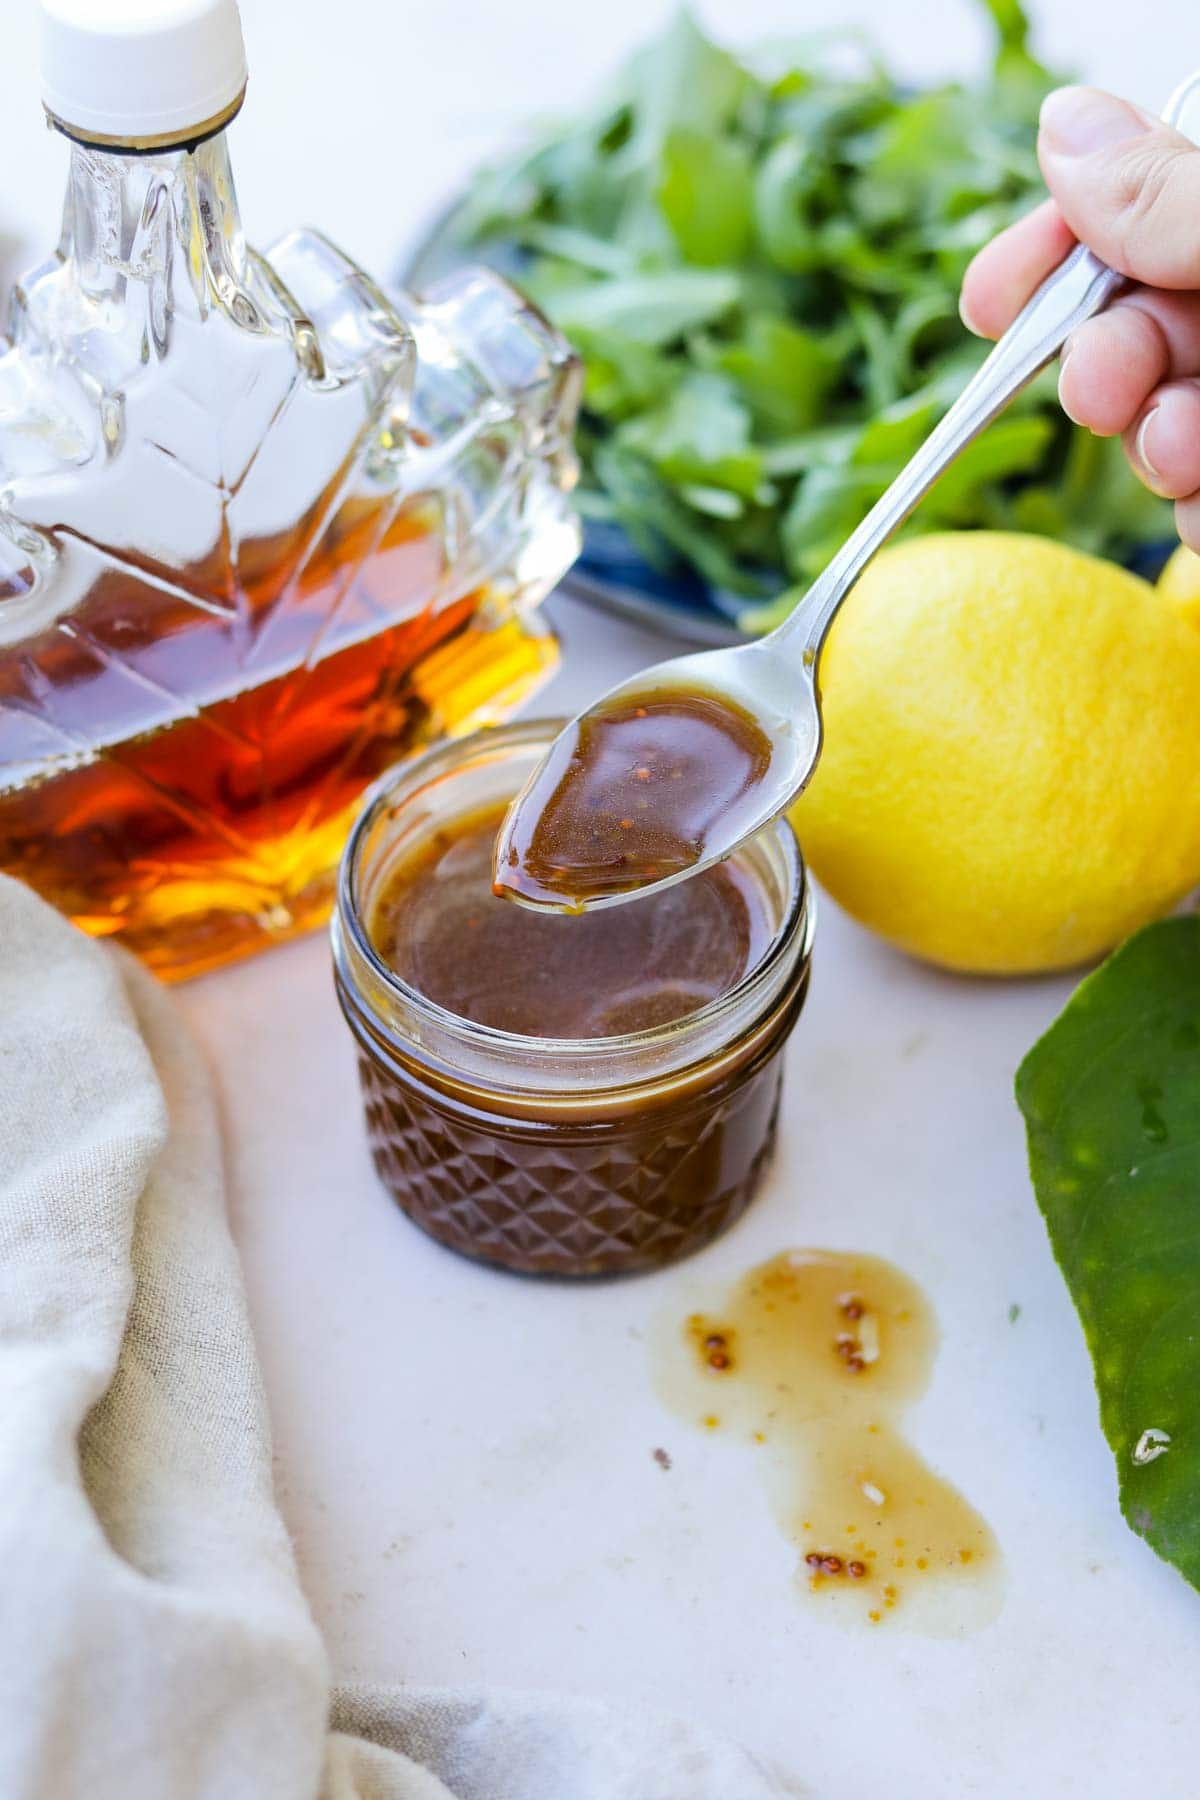 Spoon stirring maple balsamic vinaigrette dressing in a glass jar with maple syrup and lemon.